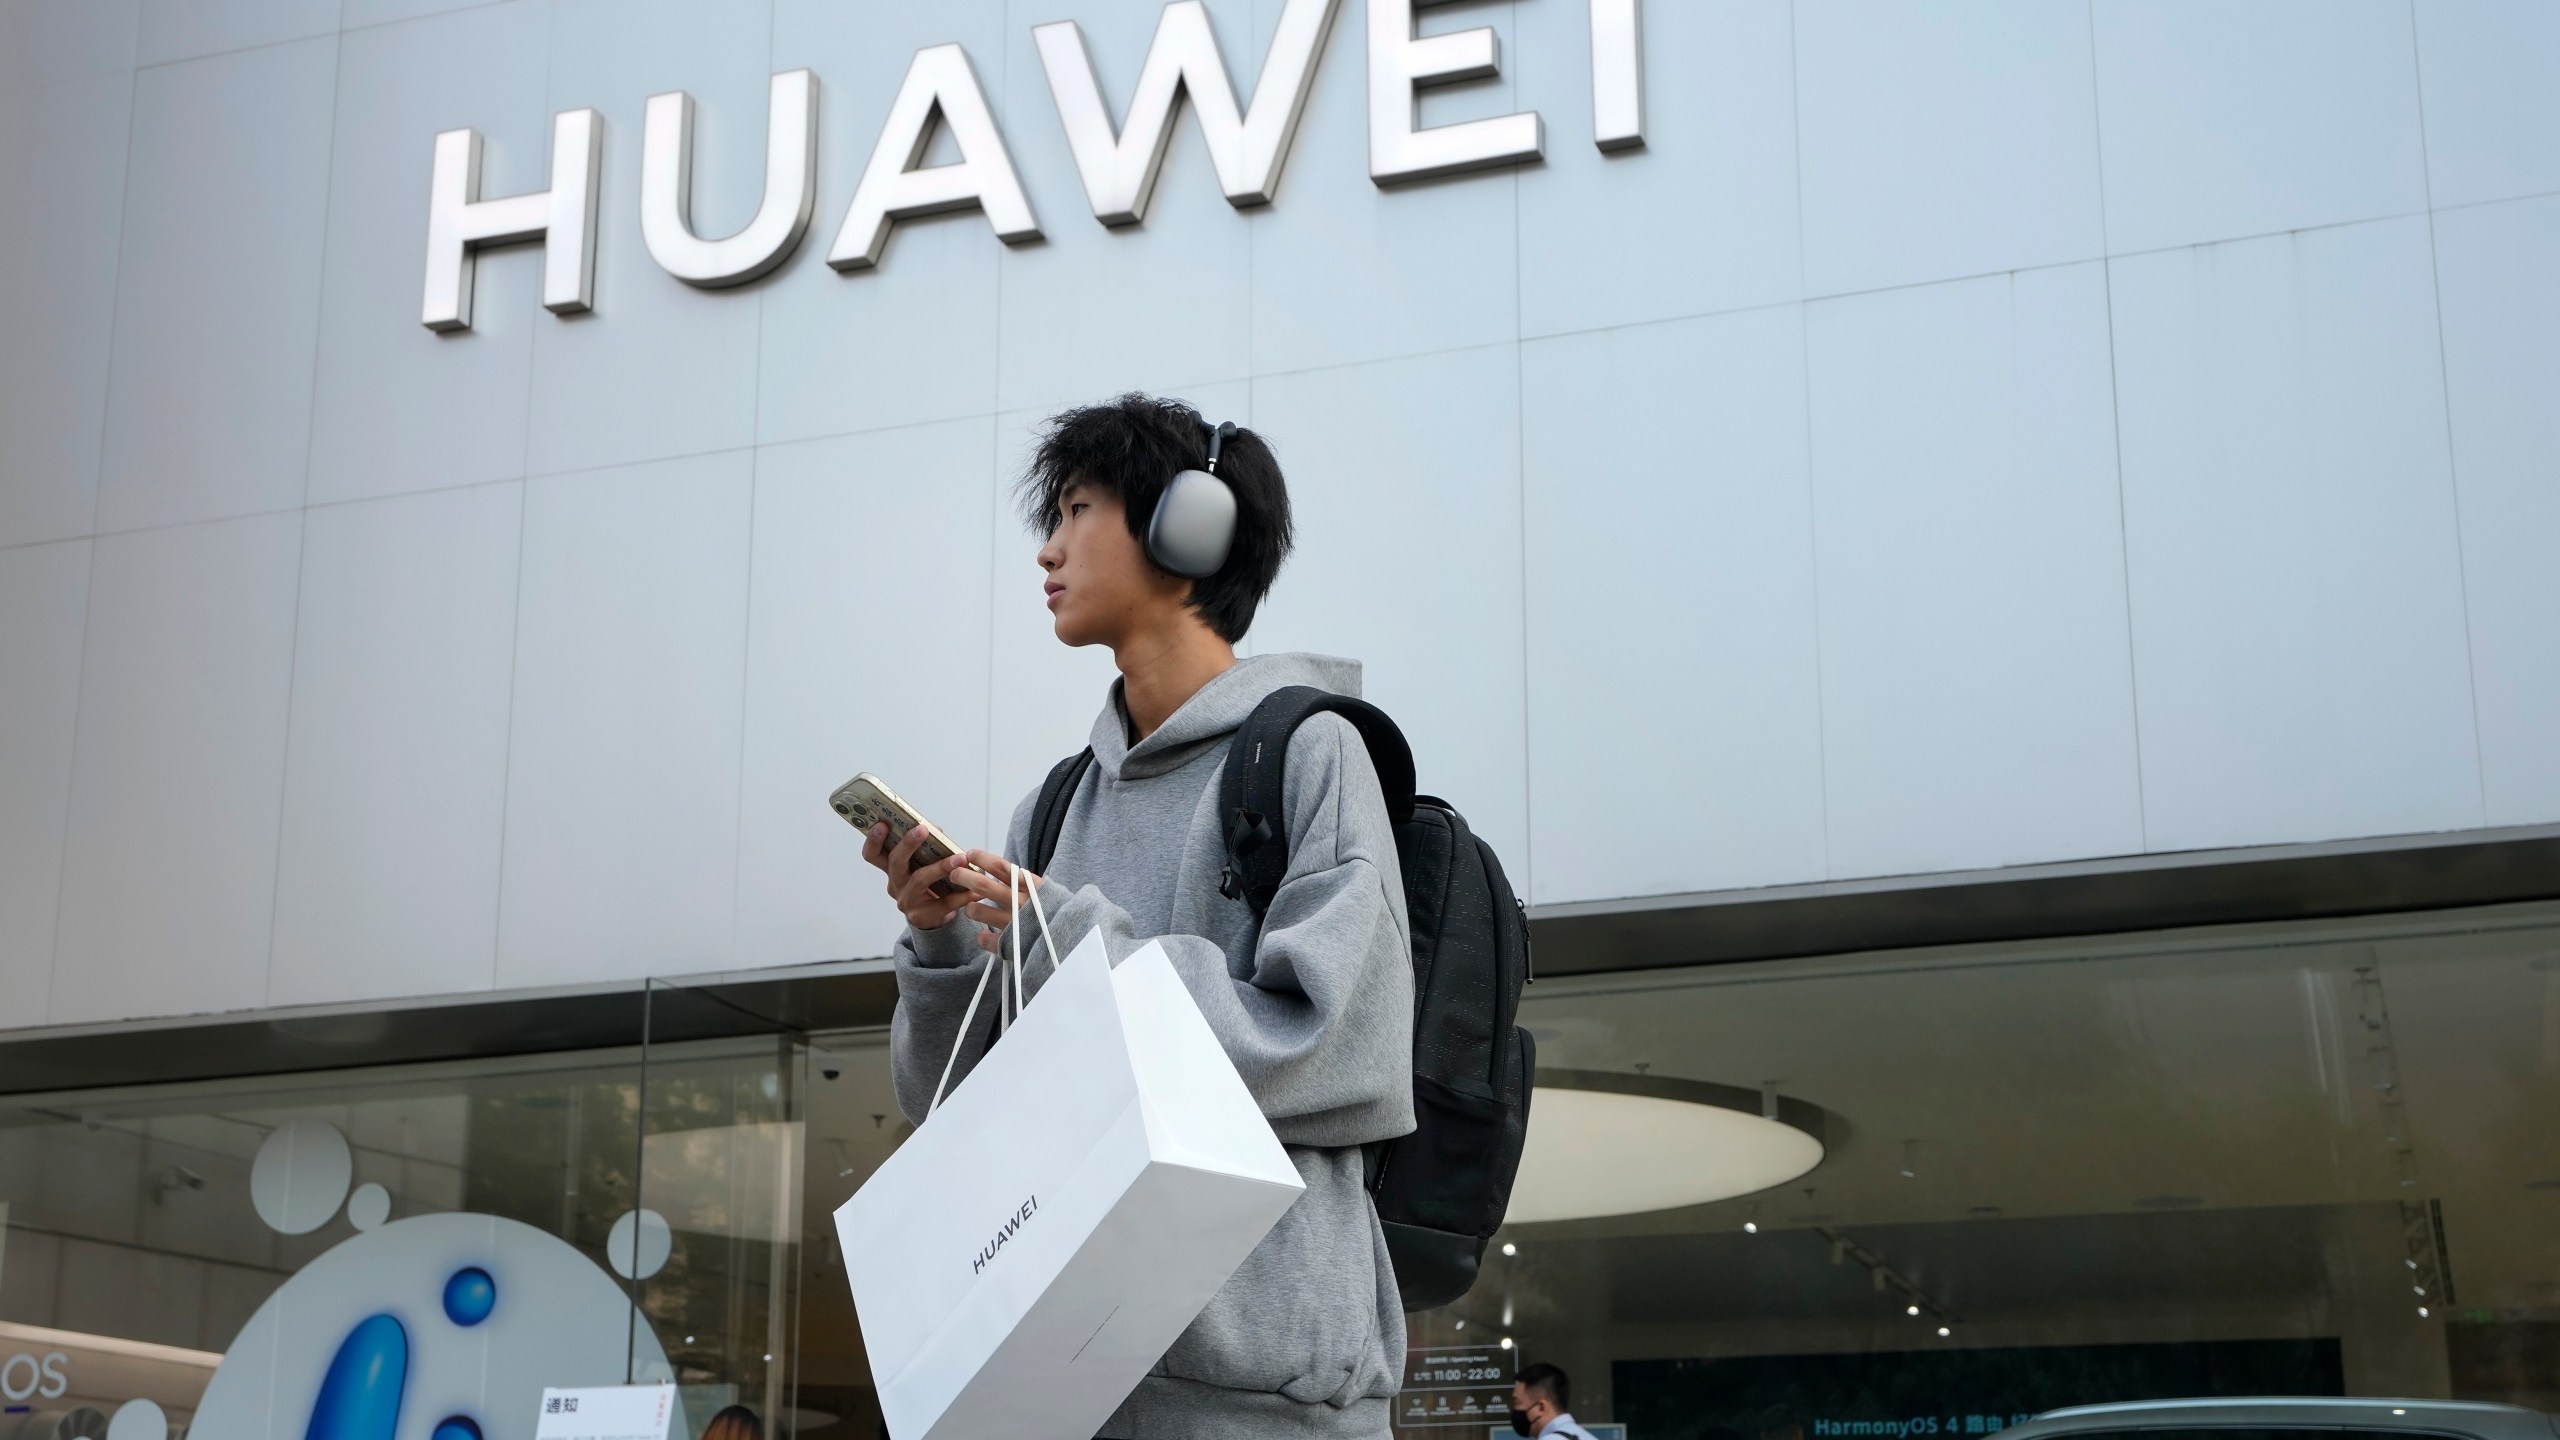 FILE - A customer carries his purchased Huawei product outside a Huawei store after he attended the Huawei new product launch conference in Beijing, on Sept. 25, 2023. Chinese telecoms gear company Huawei Technologies has reported its profit more than doubled last year as its cloud and digital businesses thrived in spite of U.S. sanctions. (AP Photo/Andy Wong, File)